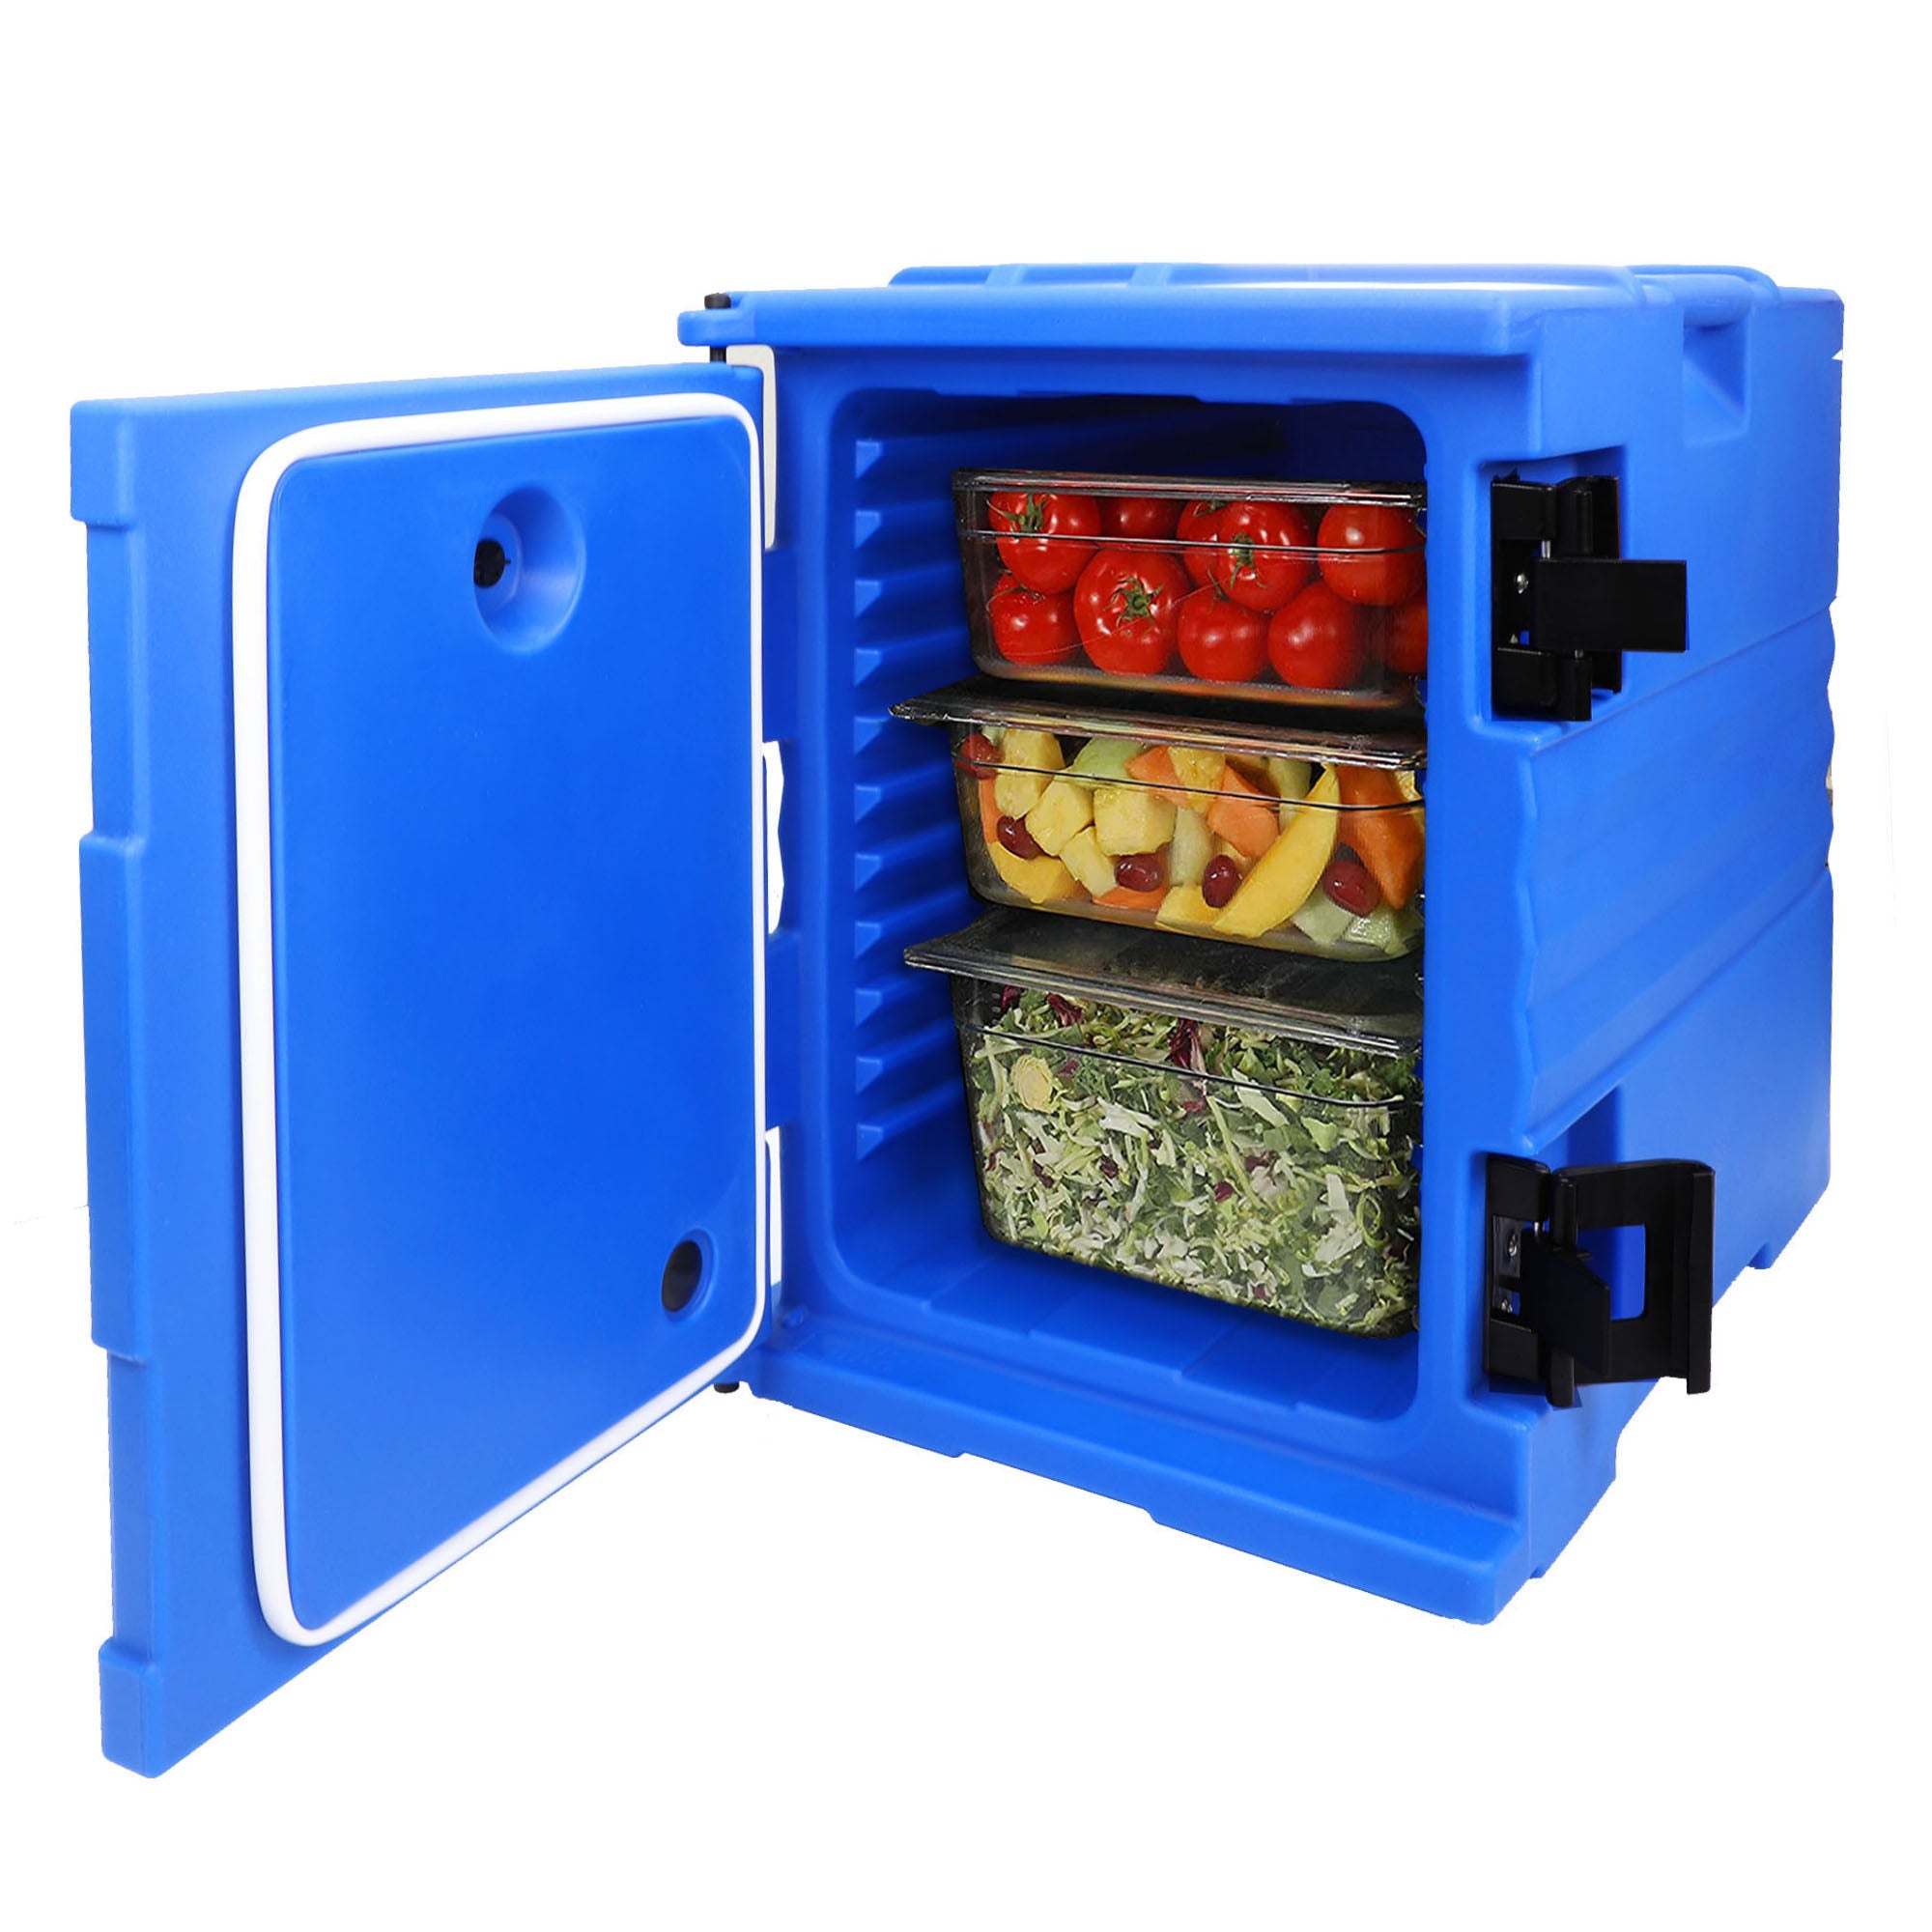 82 QT Insulated Food Pan Carrier Front Loading Food Warmer with